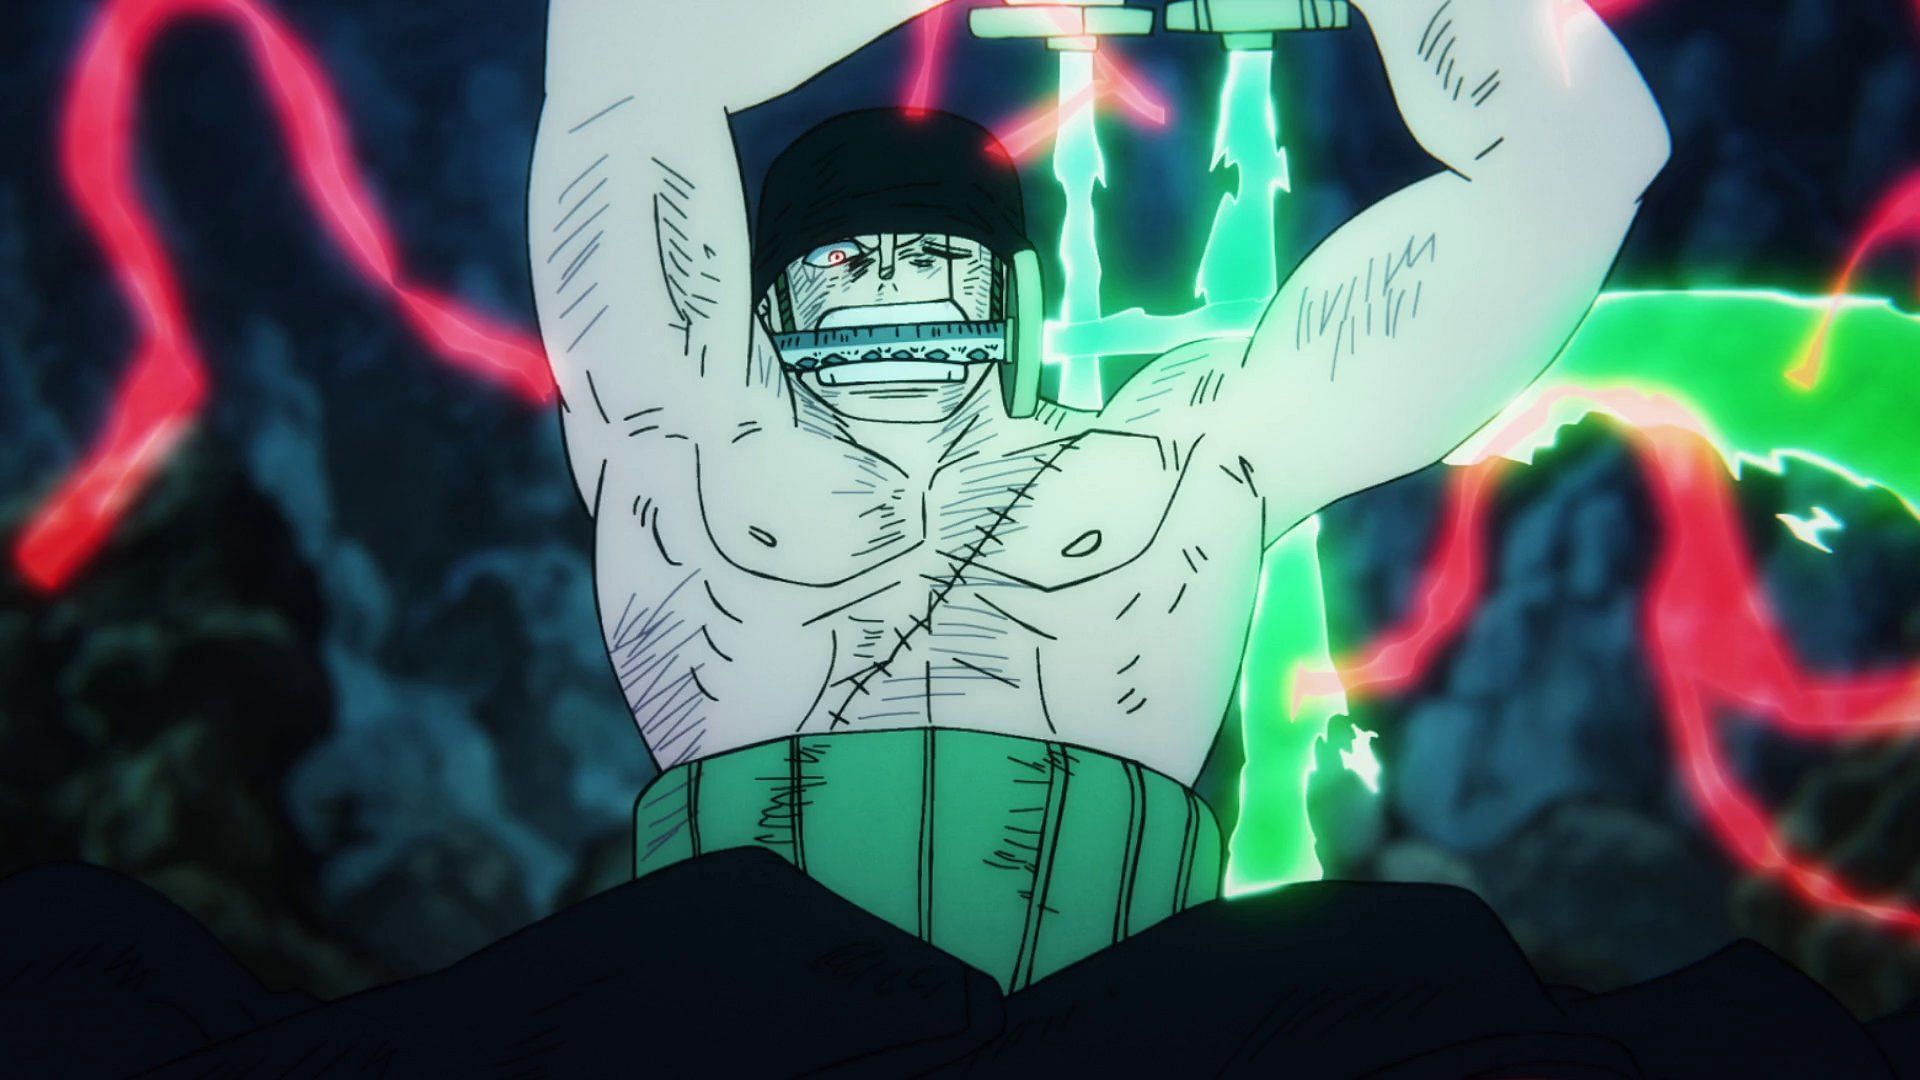 One Piece episode 1062: How strong is King, the Lunarian survivor?